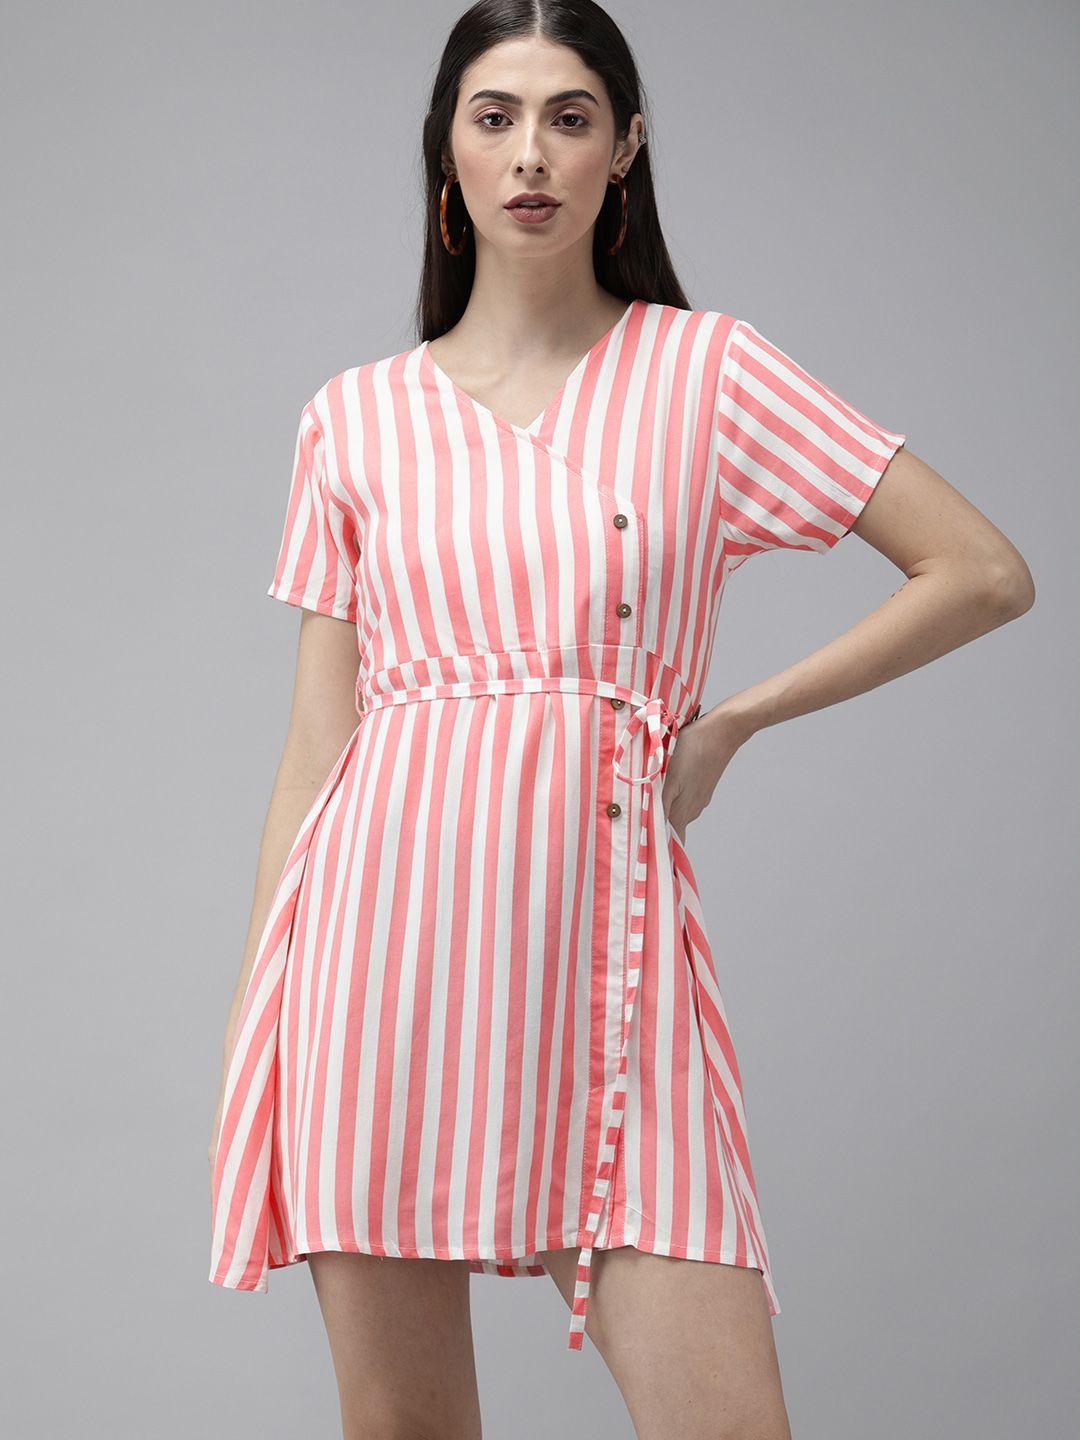 the dry state women white & peach-coloured striped a-line dress with tie-up detailing